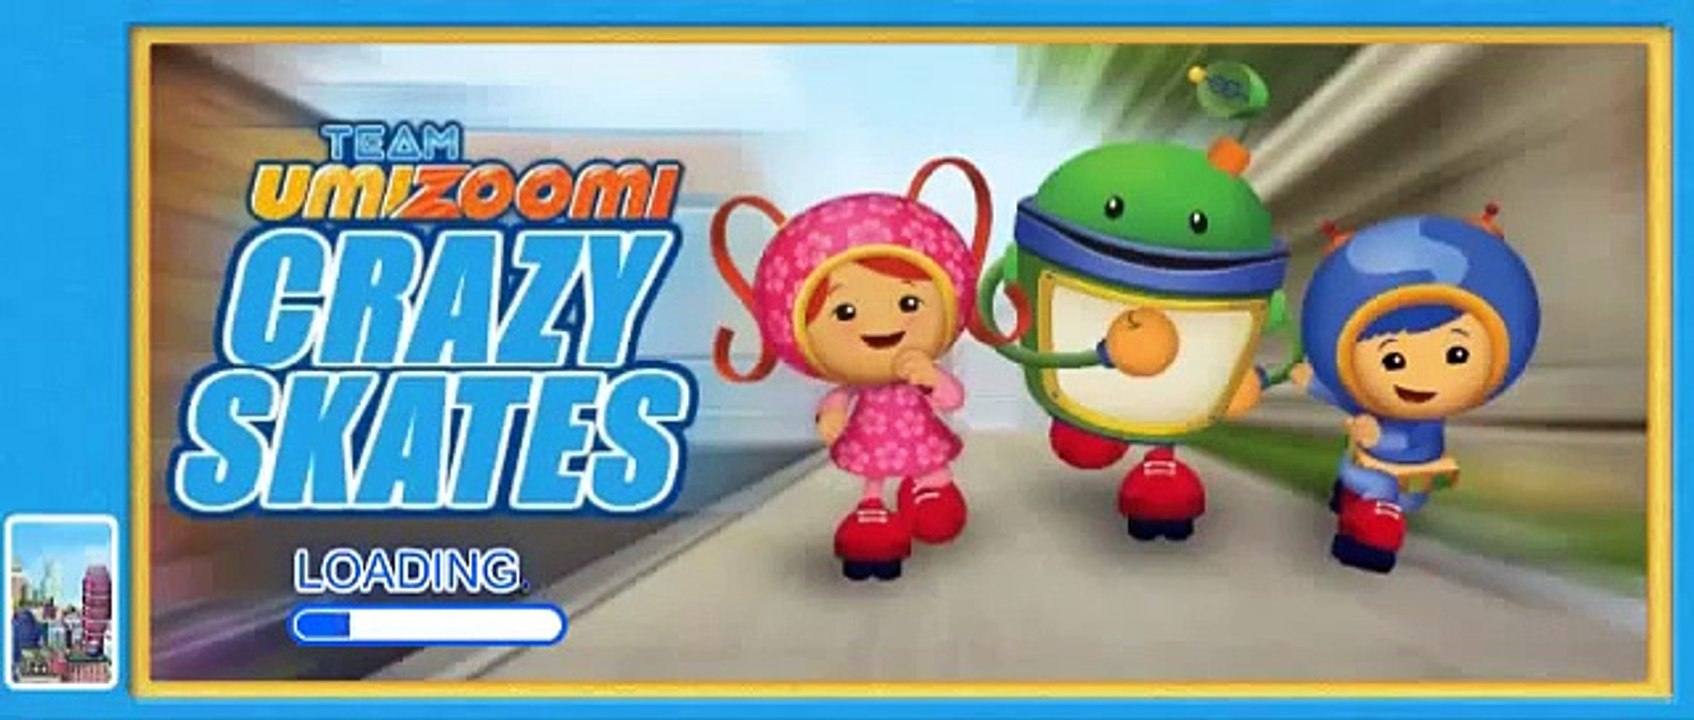 Team Umi Zoomi: Counting For Kids Team Umizoomi Cartoon Video Game Episode  - video Dailymotion